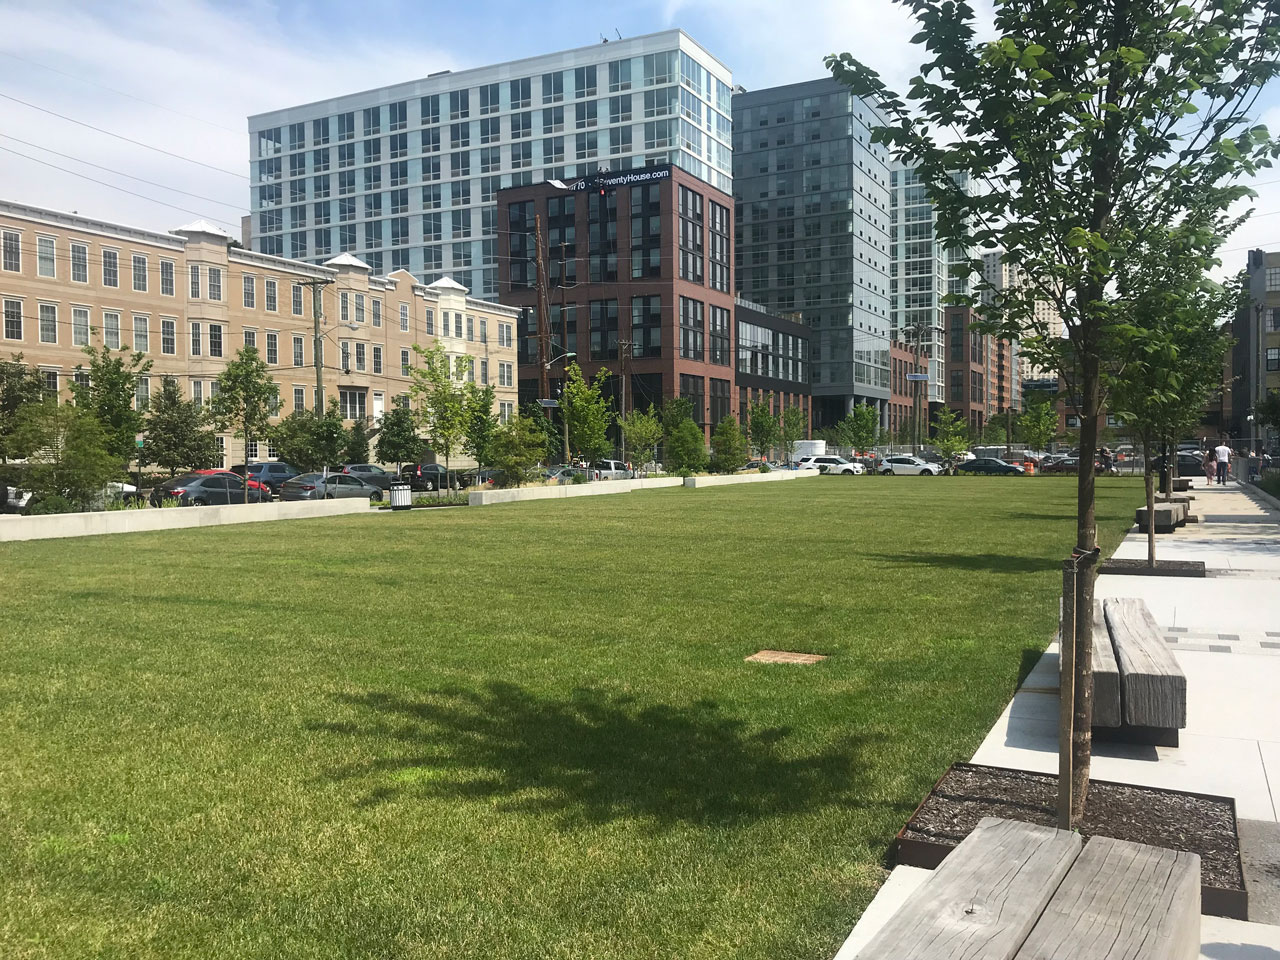 New Park At 7th And Jackson Streets Hoboken 3